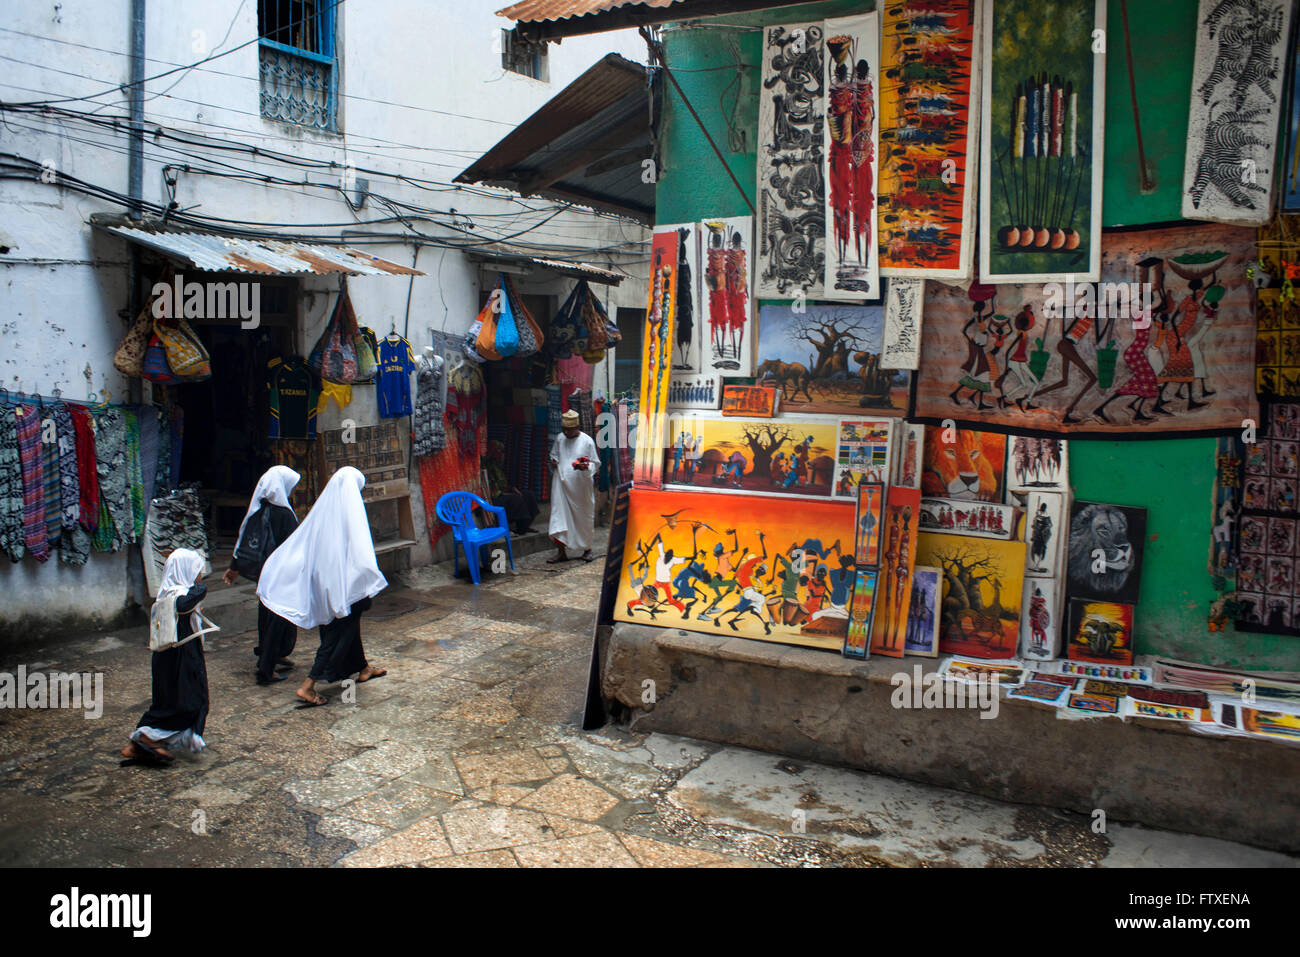 Streets of the center of Stone Town, Zanzibar, Tanzania. Shops selling paintings, pictures, and local crafts. Stock Photo